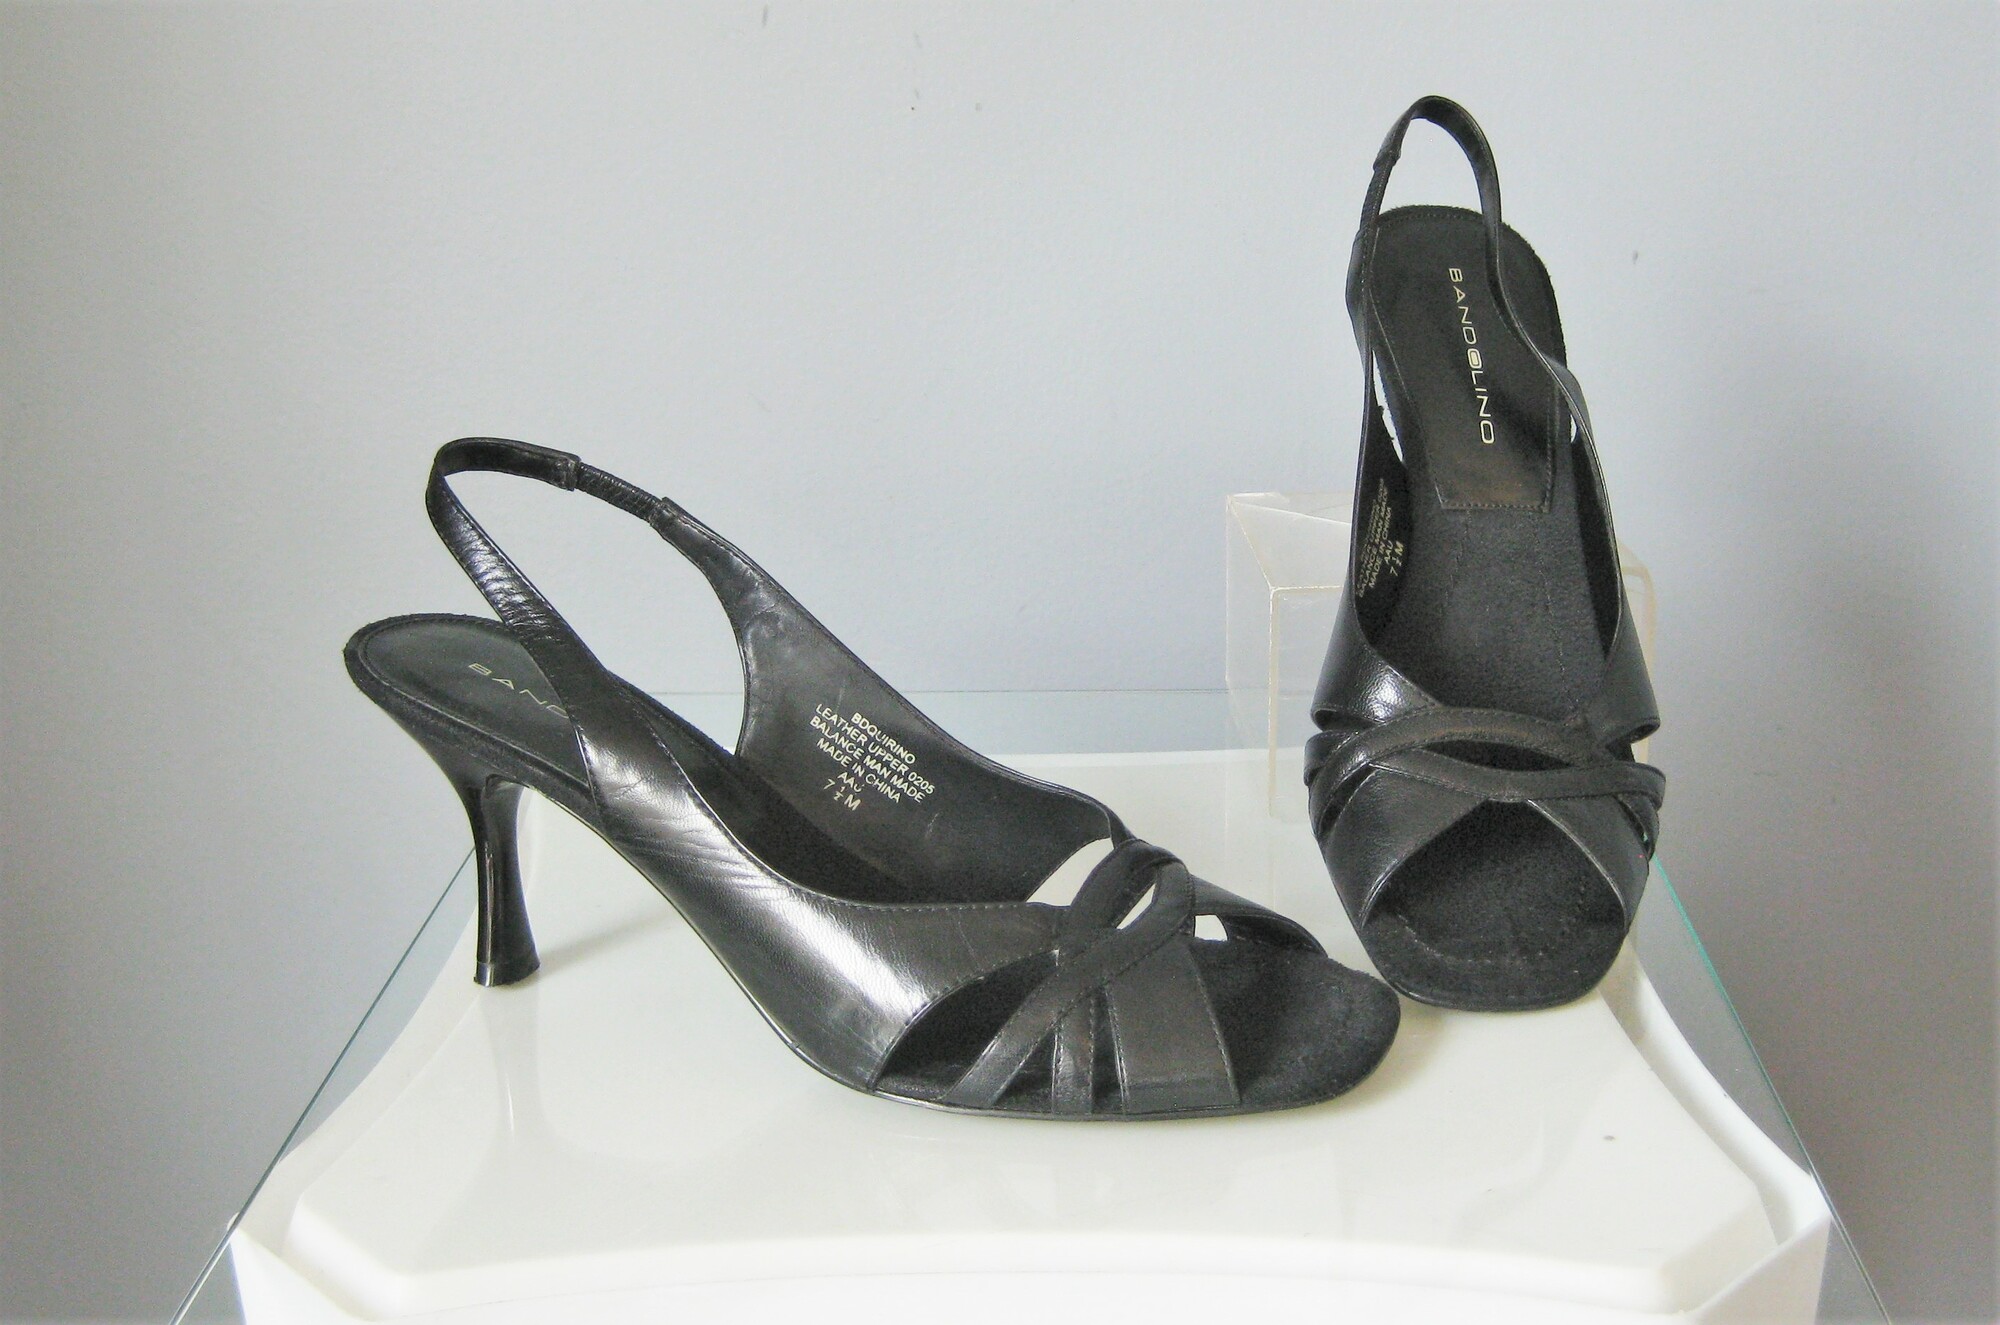 Bandolino Slingback, Black, Size: 7.5
Simple dressy leather slingbacks from Bandolino
This model is called BDQuirino
They're black leather on top with a comfortable insole and a patent leather clad heel
3 heel
Size 7.5
Excellent condition: they have been worn as shown on the bottoms.

Thanks for looking!
#46552